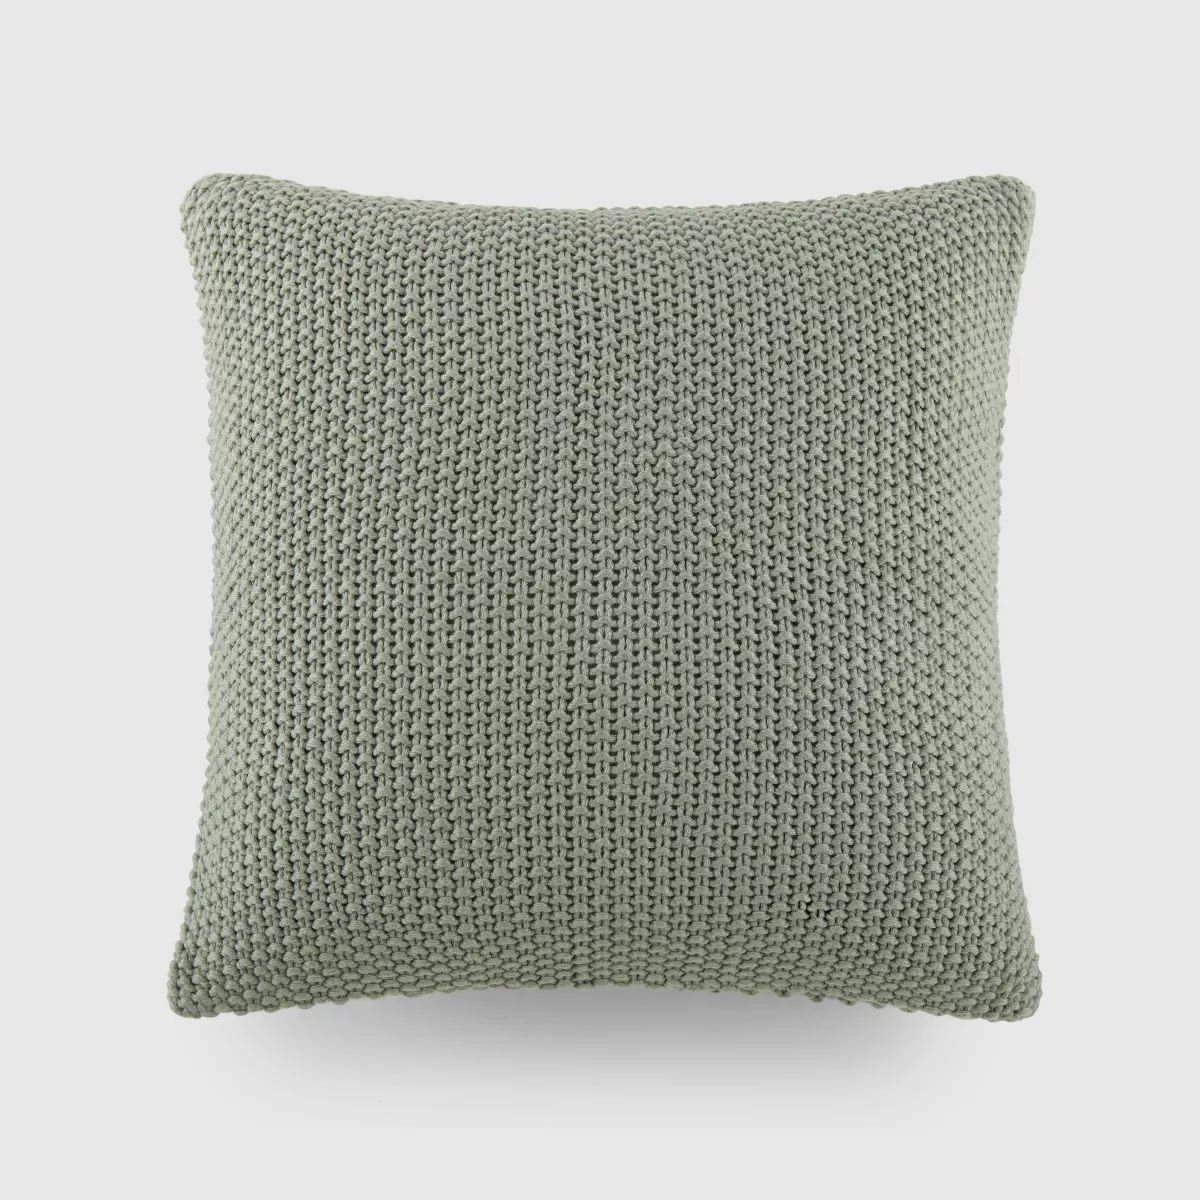 Stitch Knit Throw Pillow Cover And Pillow Insert - Becky Cameron | Target